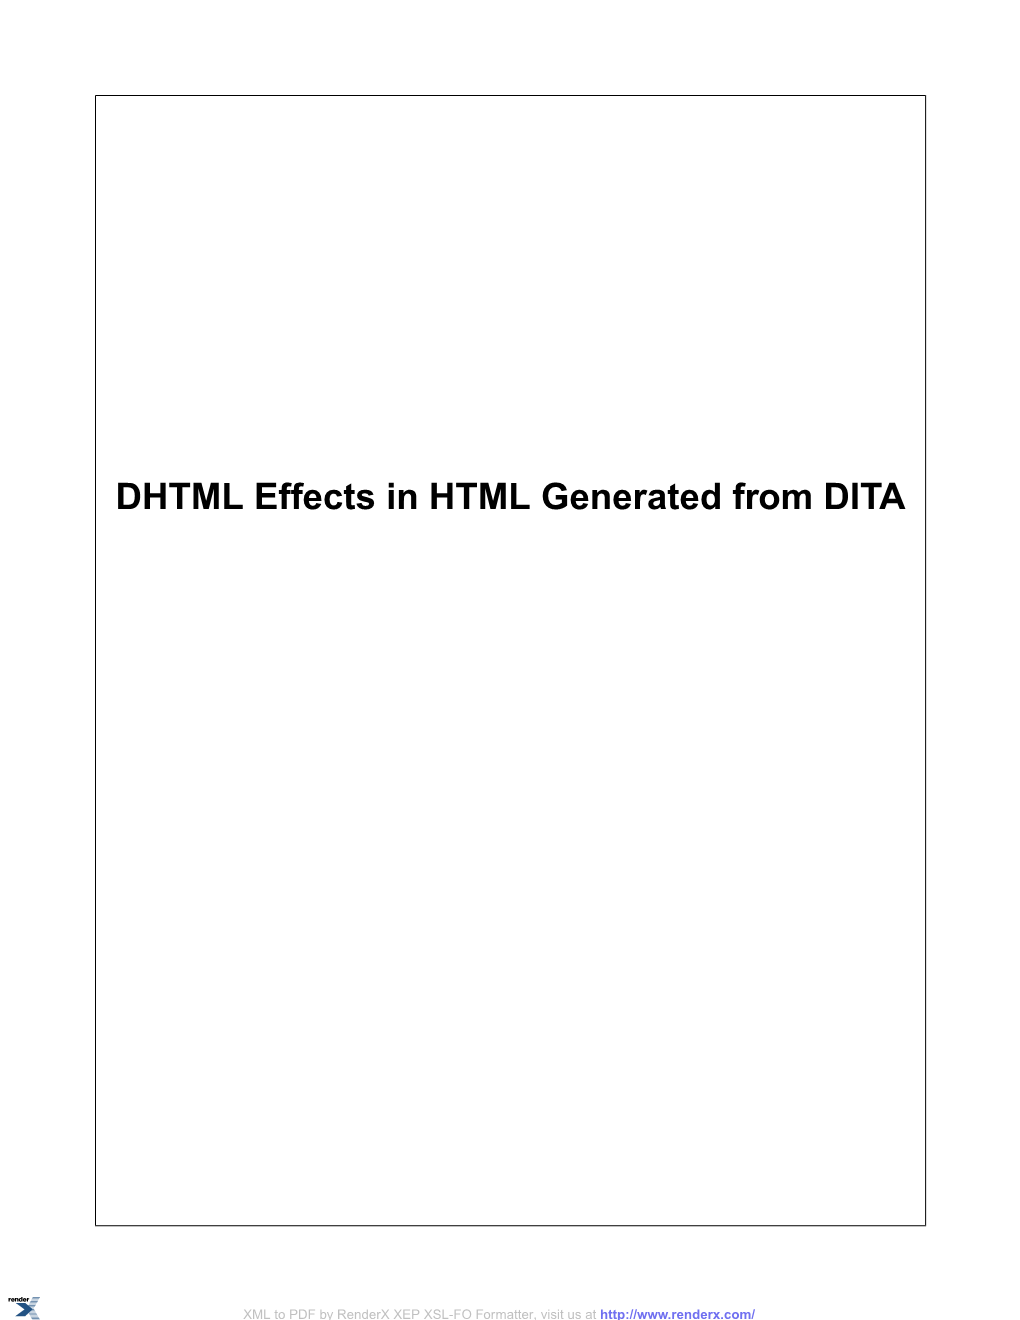 DHTML Effects in HTML Generated from DITA